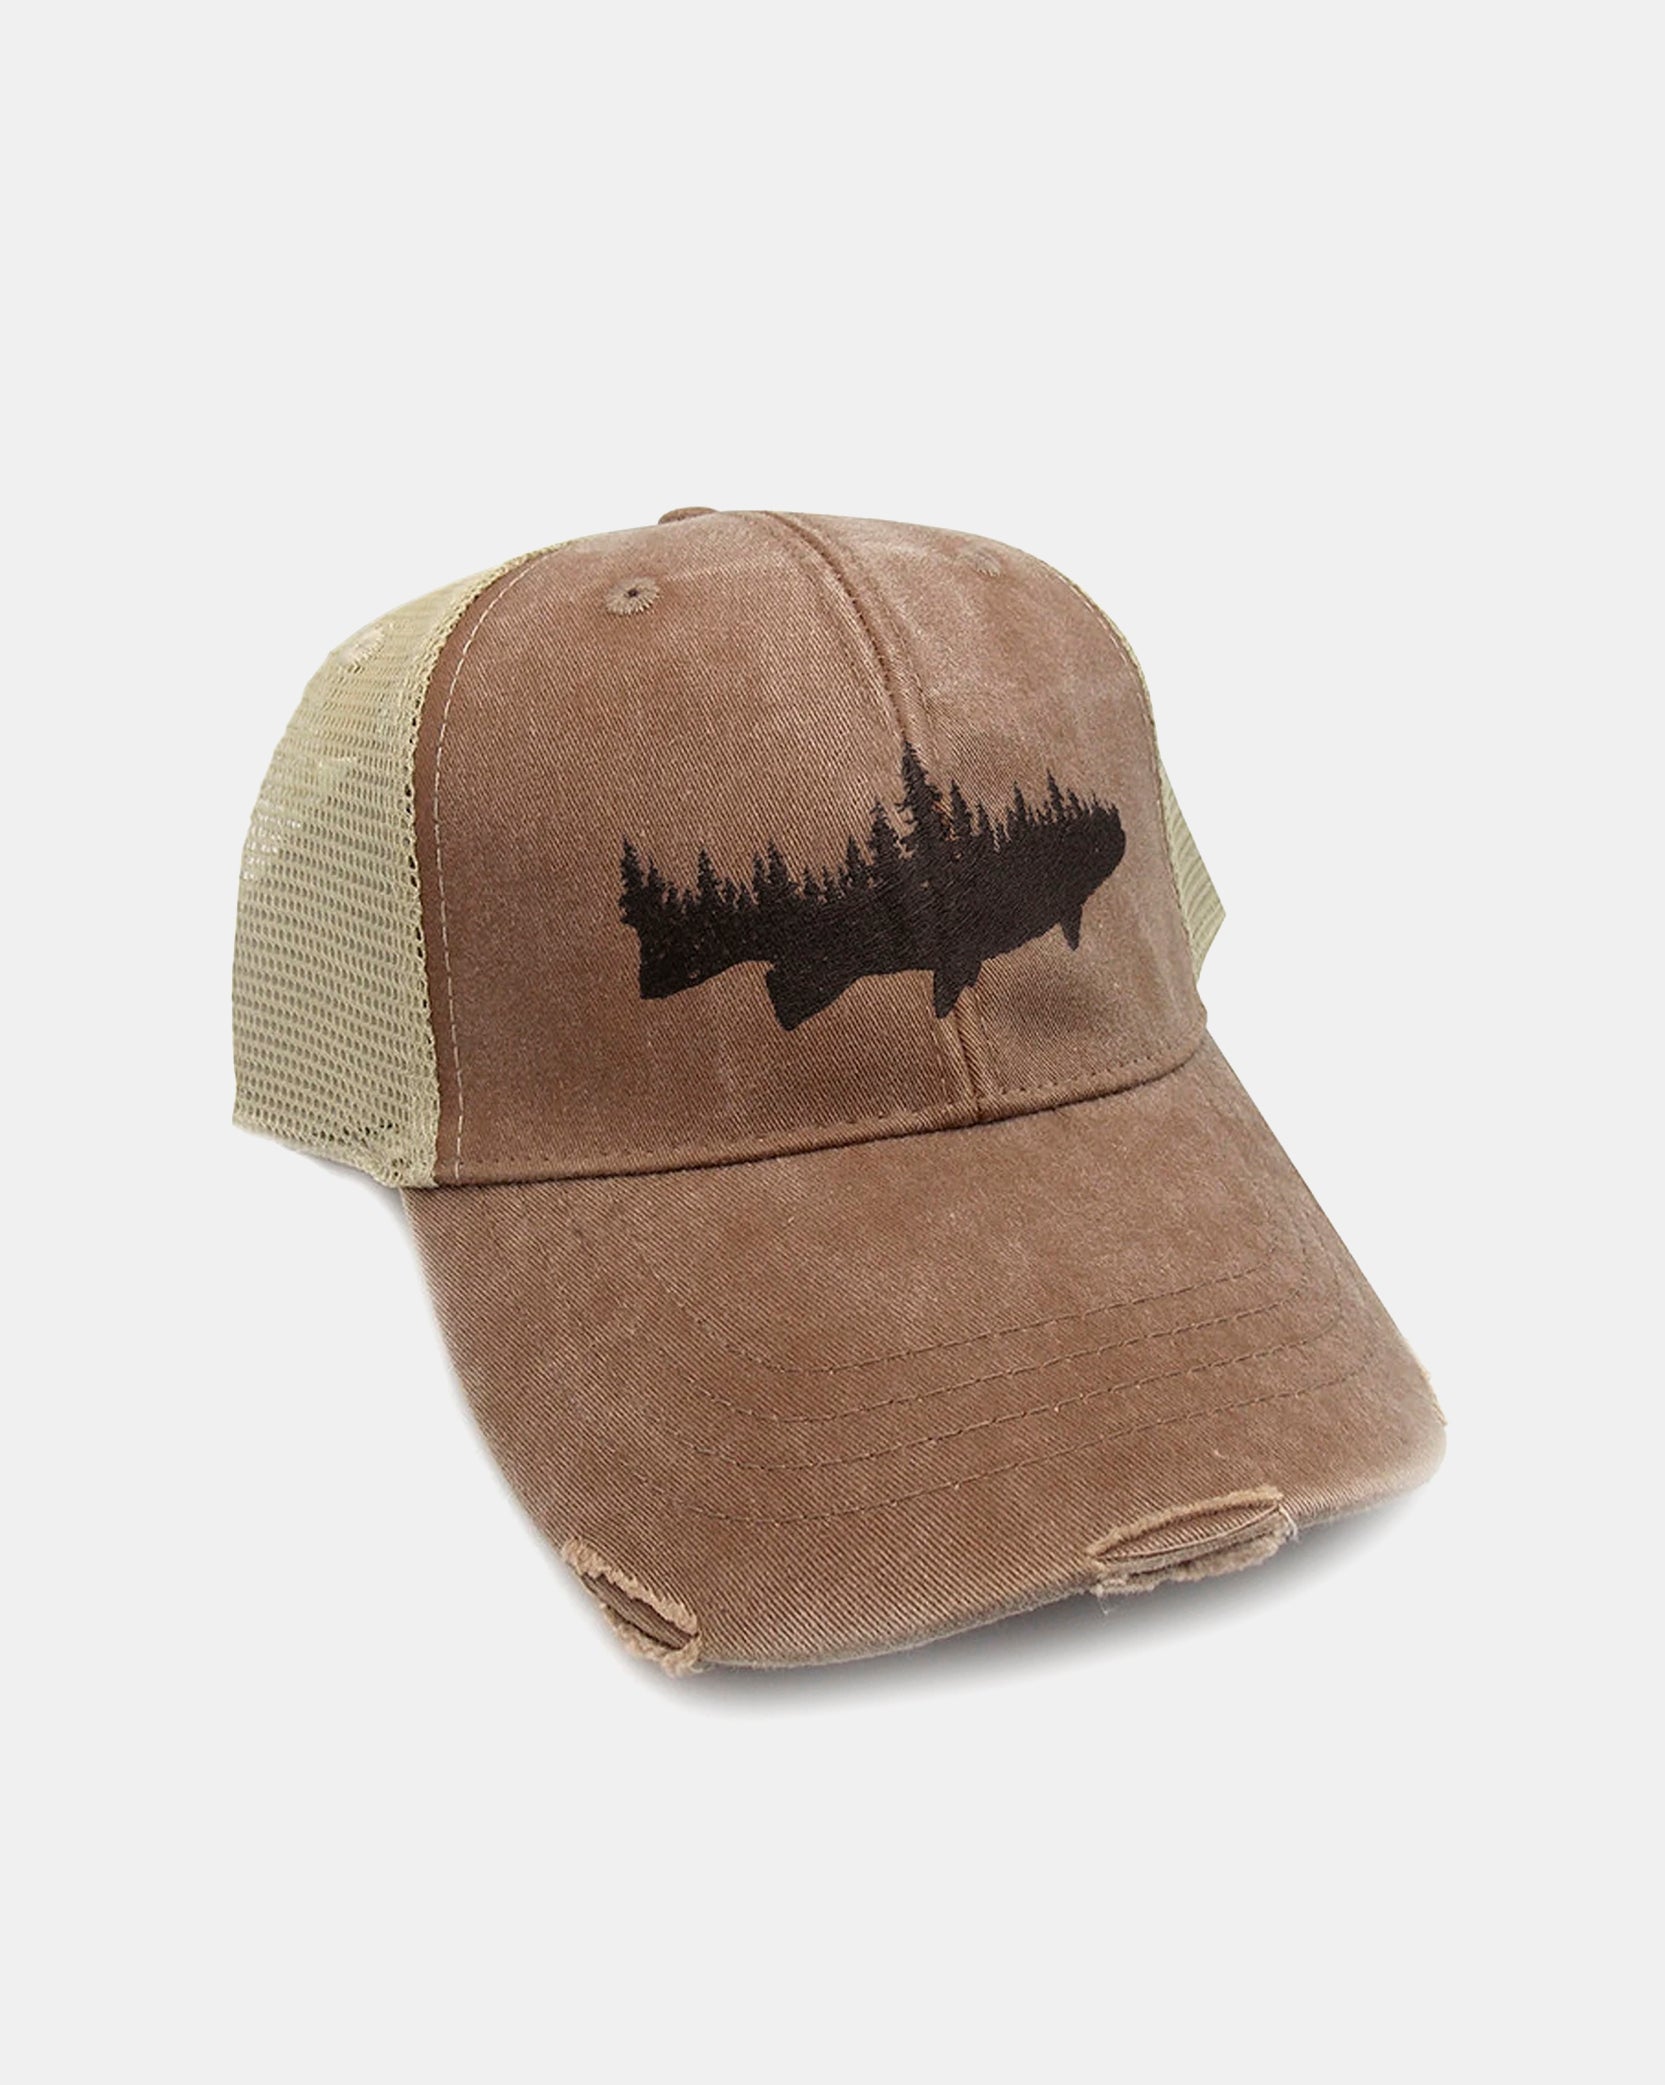 Fish And Forest Brown And Tan Trucker Cap 1